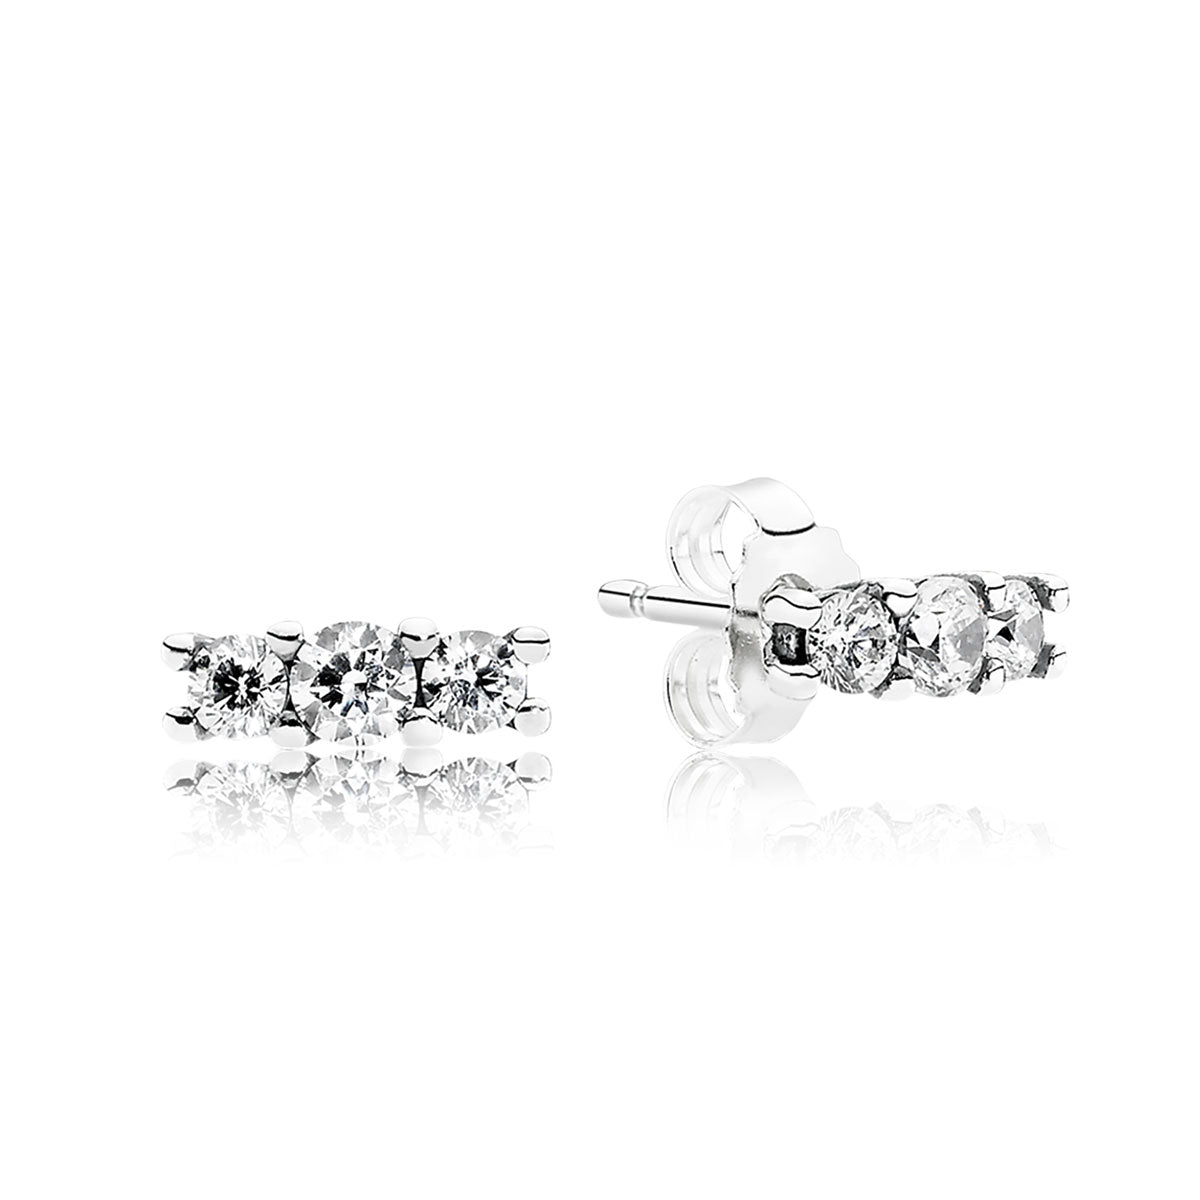 Pandora Sparkling Elegance with Clear CZ Earrings